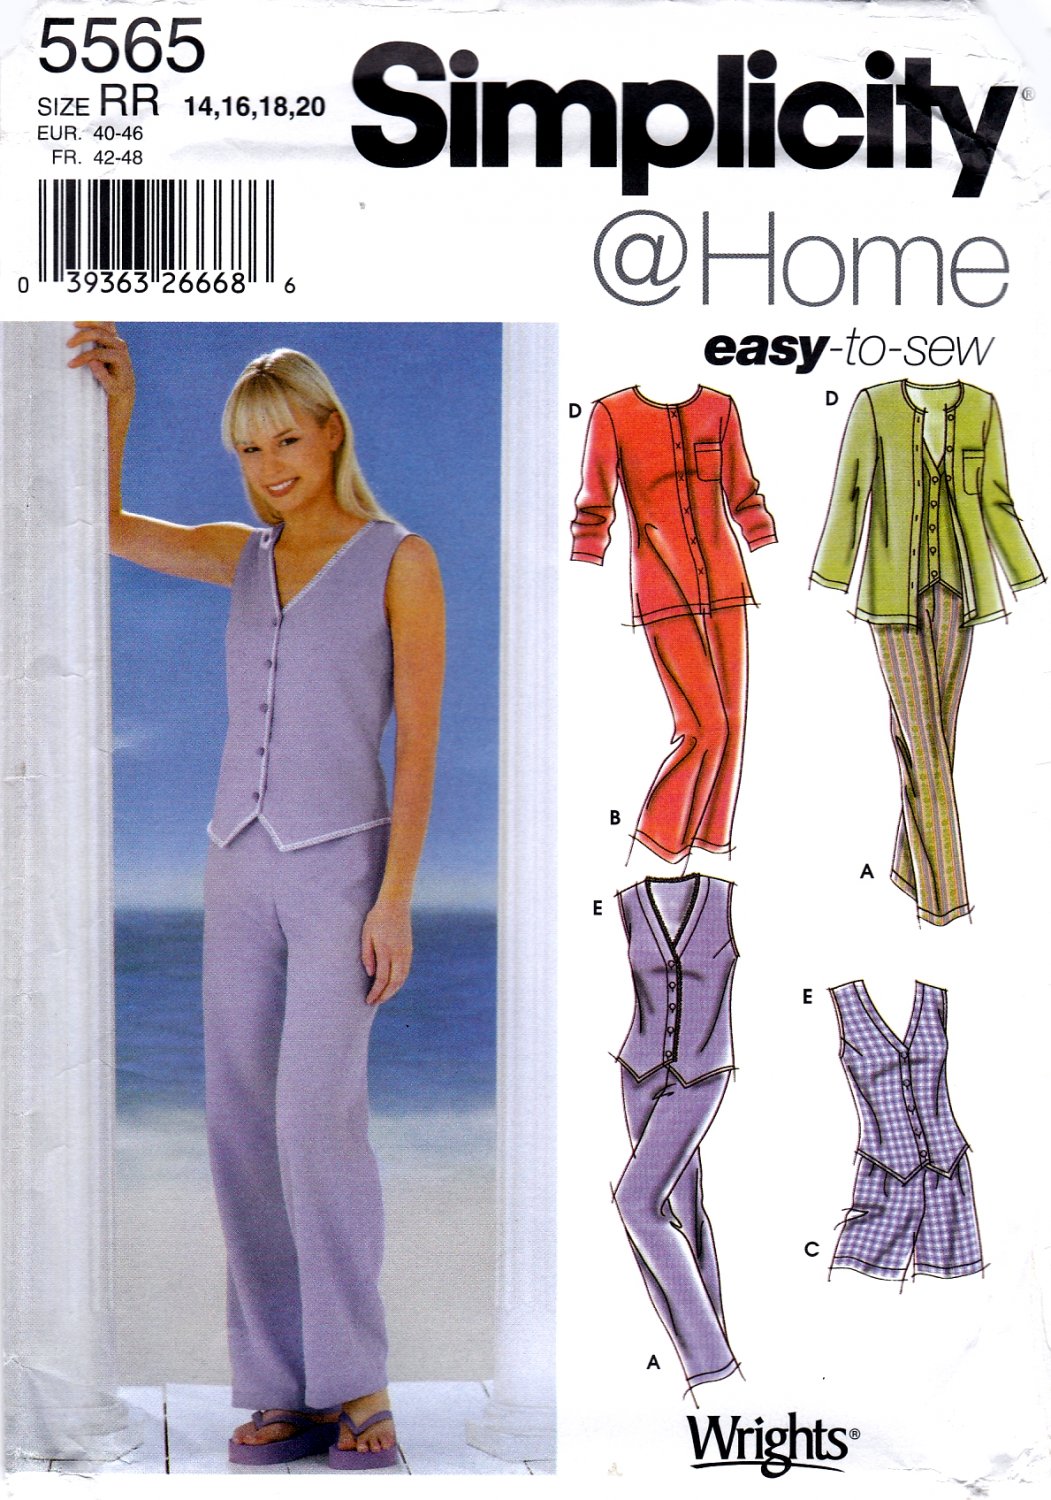 Simplicity 5565 Misses Pants Two Lengths Shorts Top Sewing Pattern Sizes 14-16-18-20